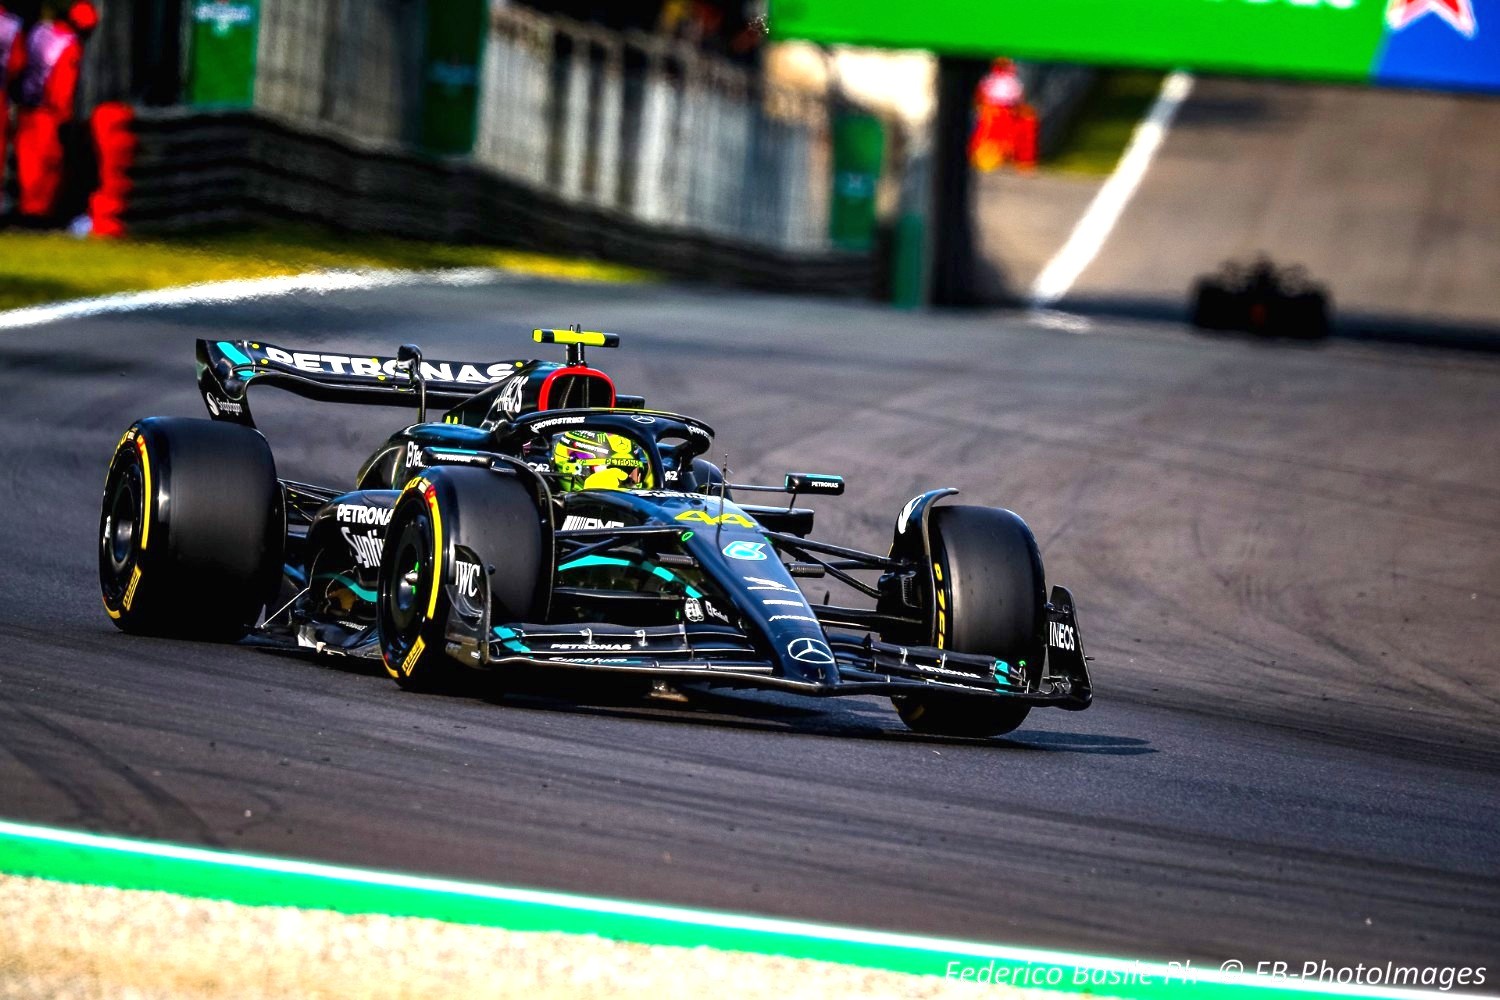 #44 Lewis Hamilton, (GRB) AMG Mercedes Ineos during the Italian GP, Monza 31 August-3 September 2023 Formula 1 World championship 2023.